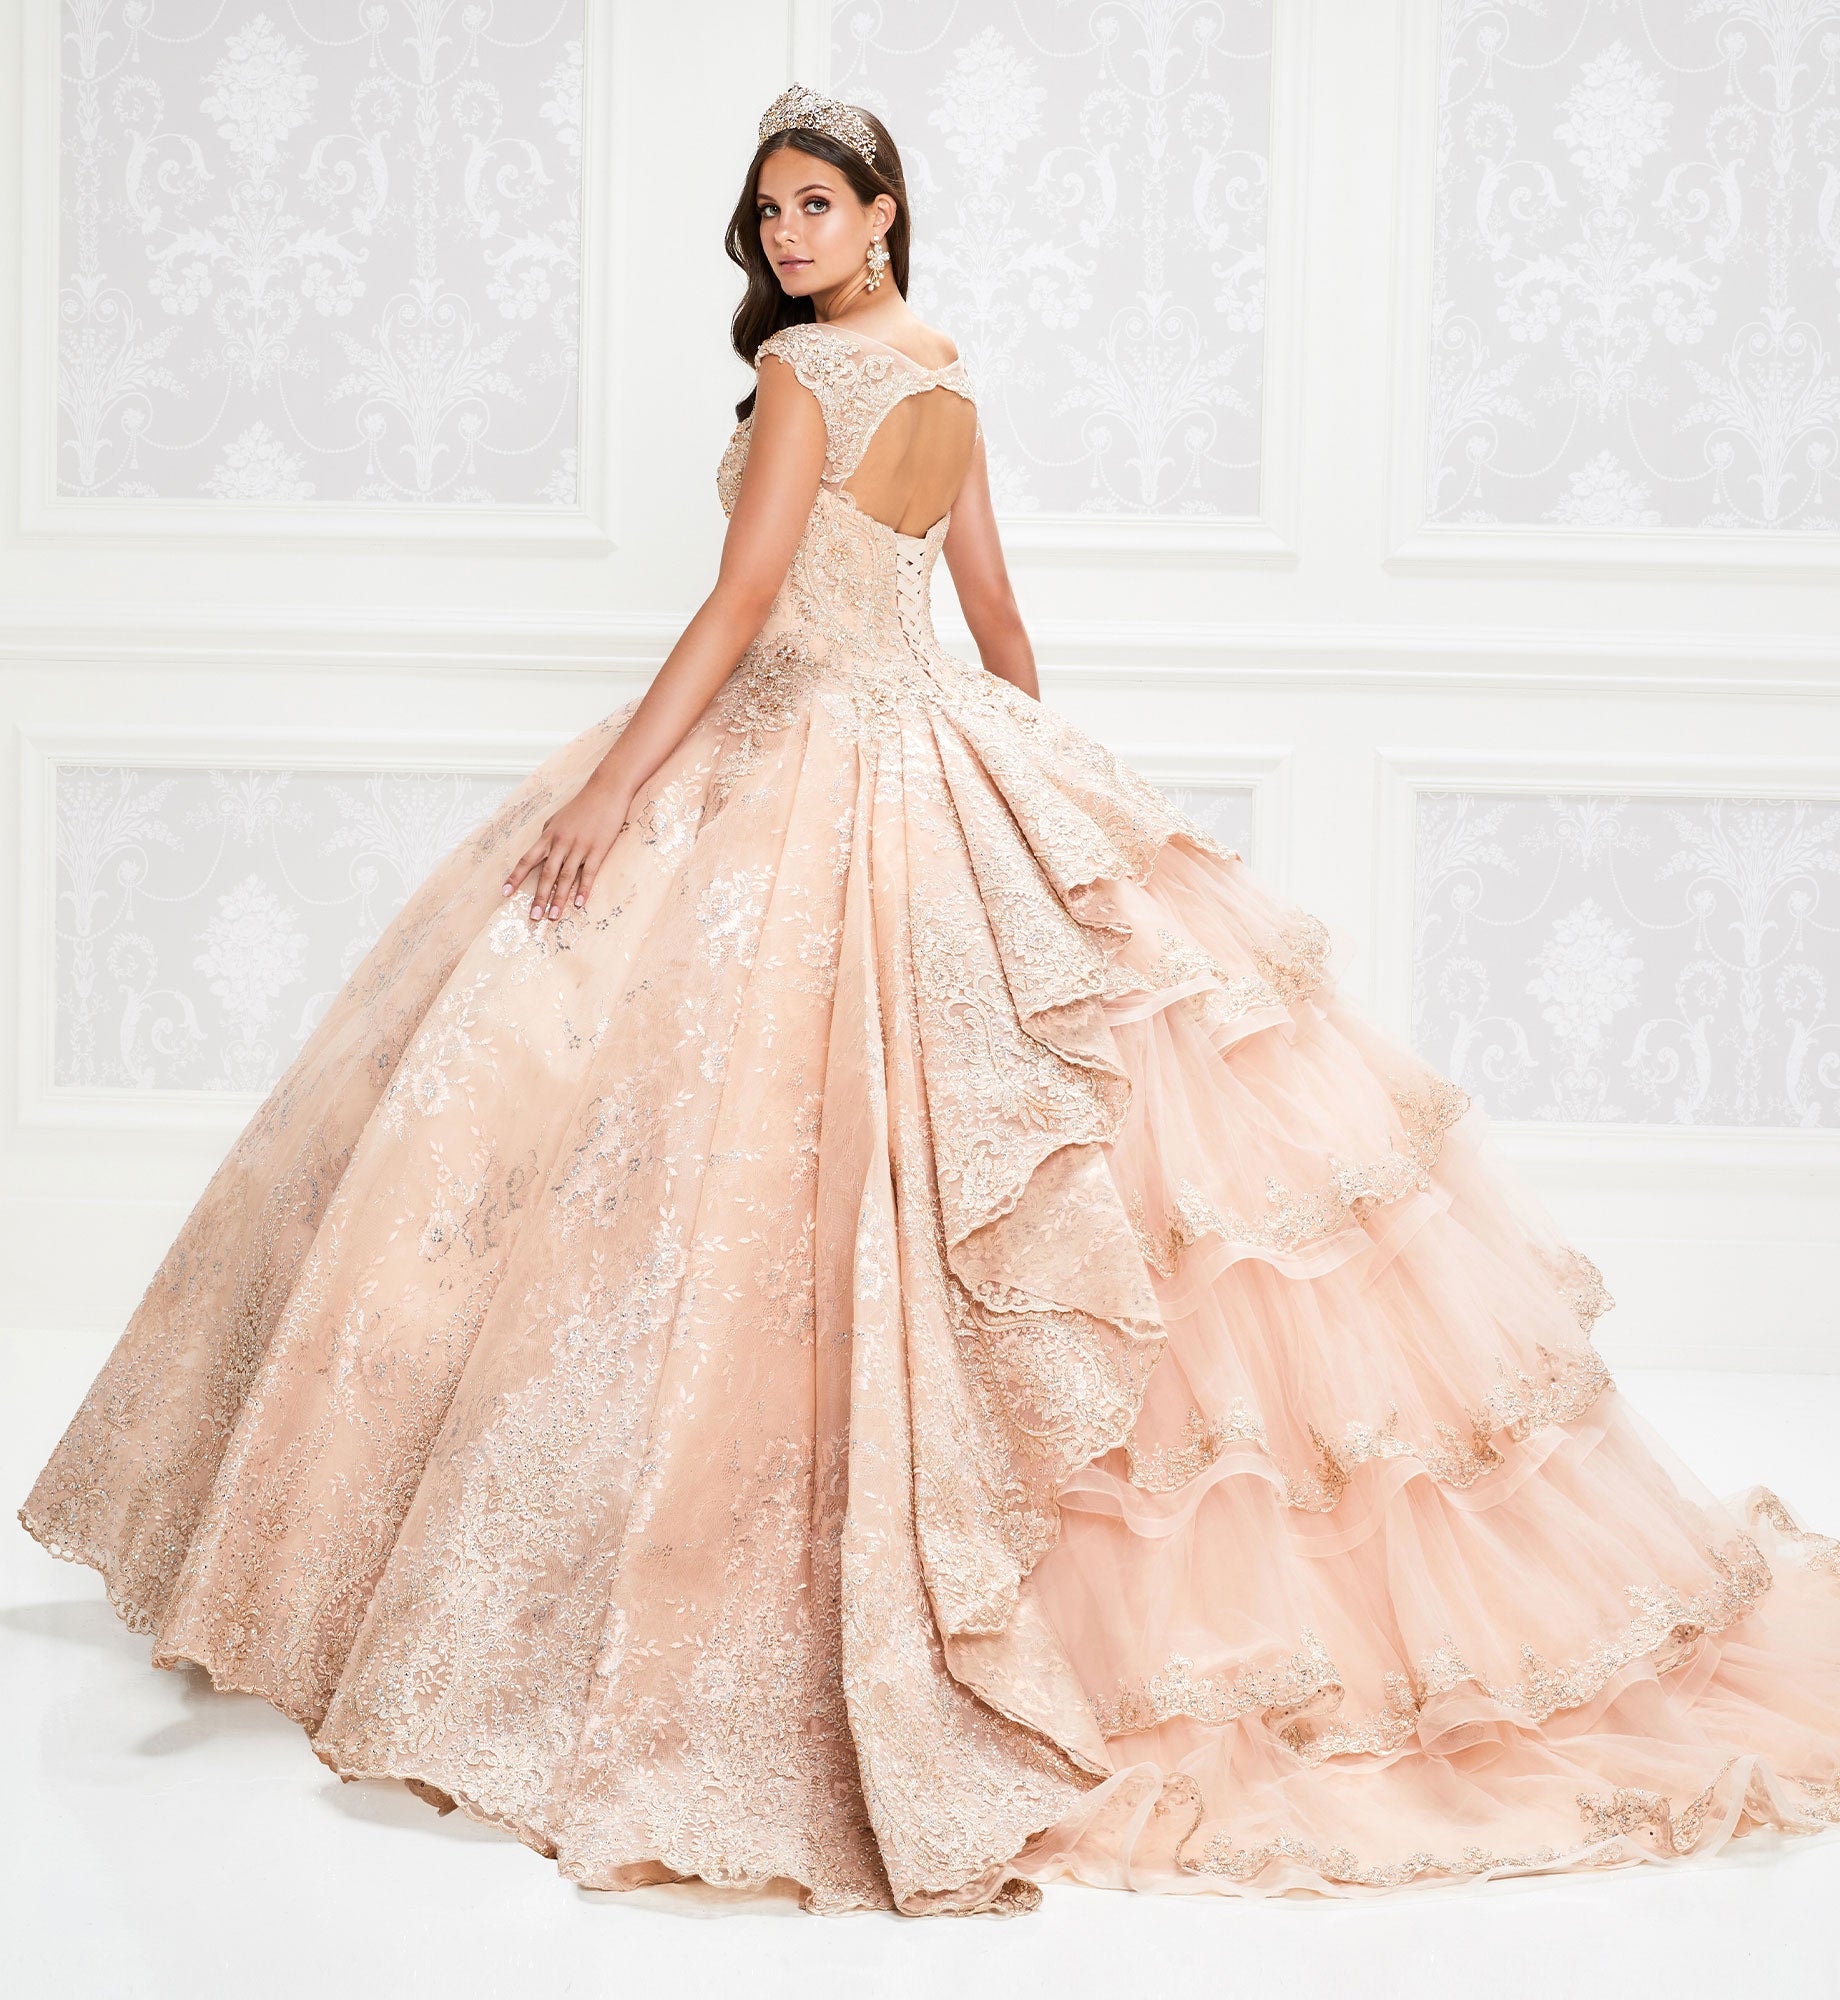 Classic quinceanera dress with high neckline and lace embroidery